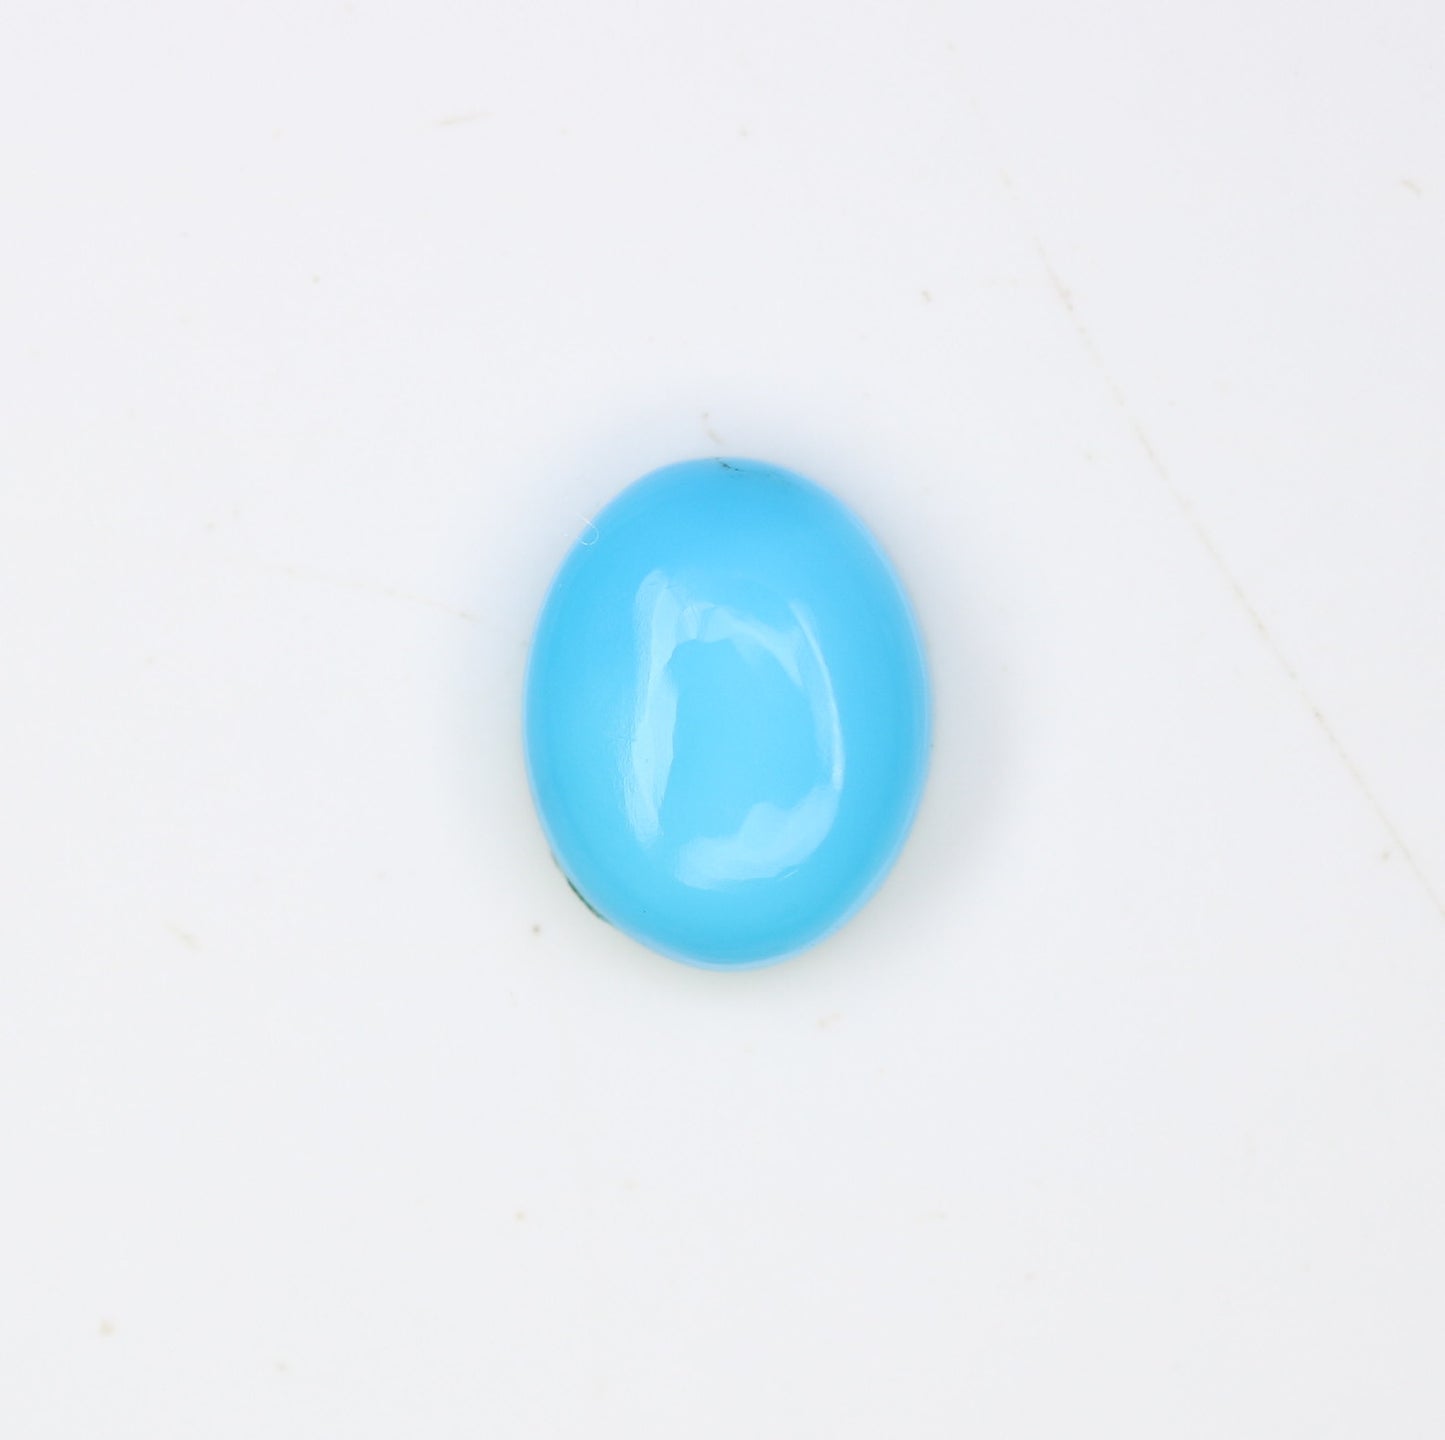 1.71 CT Natural Blue Oval Cut Turquoise Gemstone For Jewellry